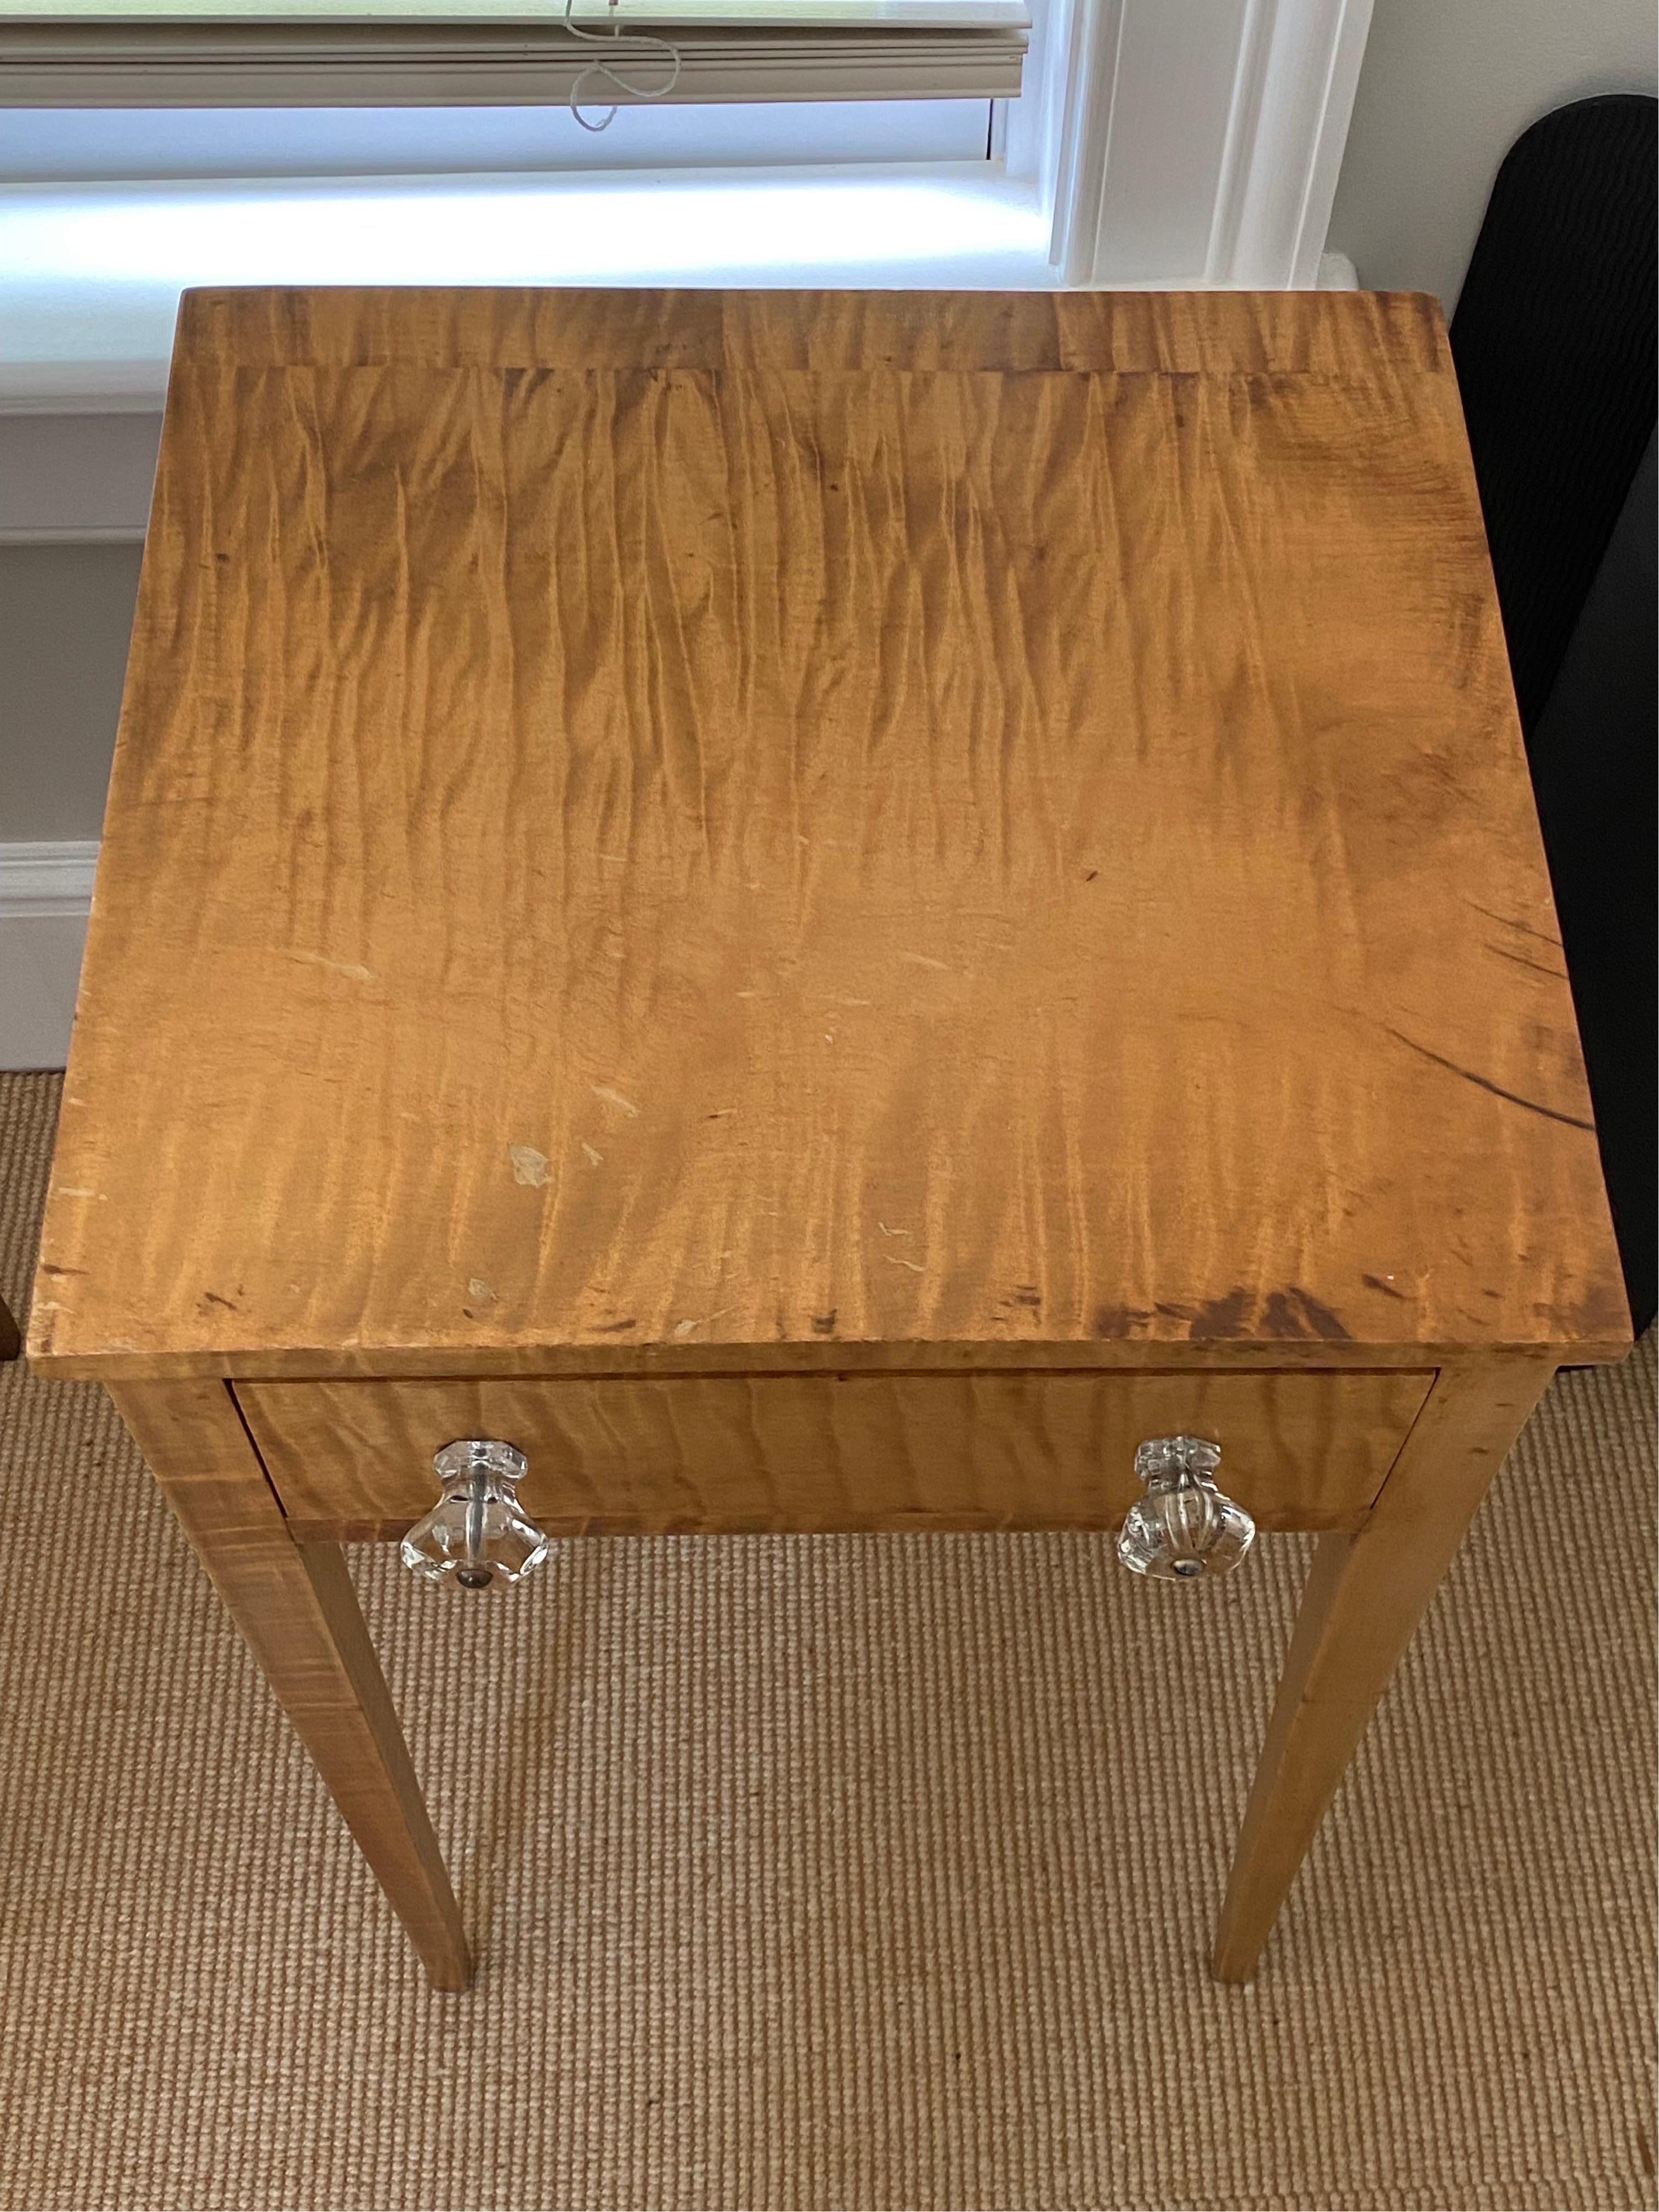 19th Century American sheraton tiger maple single drawer stand with glass knobs.
A lovely simple stand with beautiful wavy tiger maple grain and honey color finish. A single drawer with two glass knobs.
Measures: 15.66 wide x 15.25